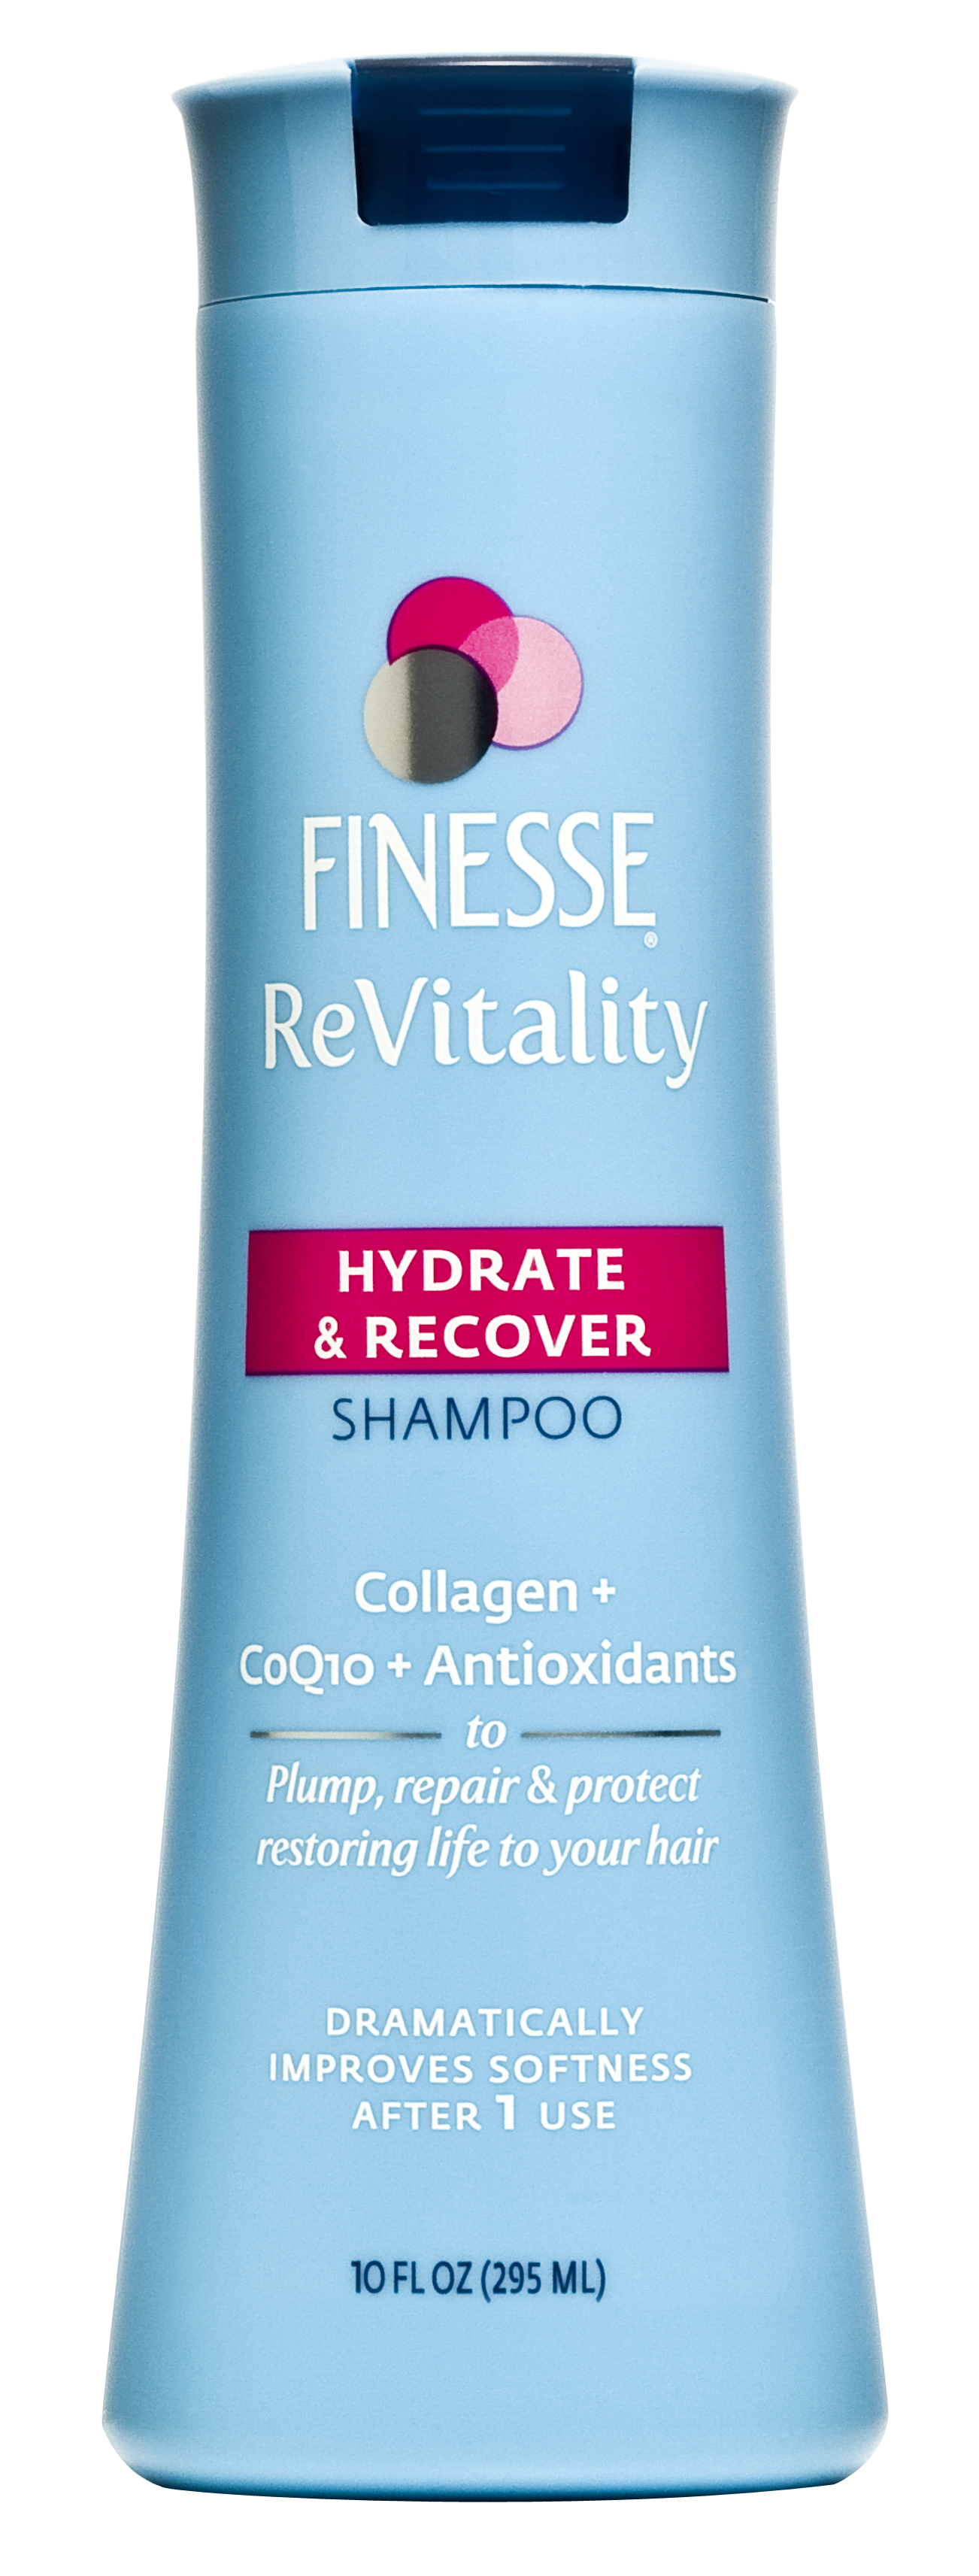 Finesse ReVitality Hydrate & Recover Shampoo